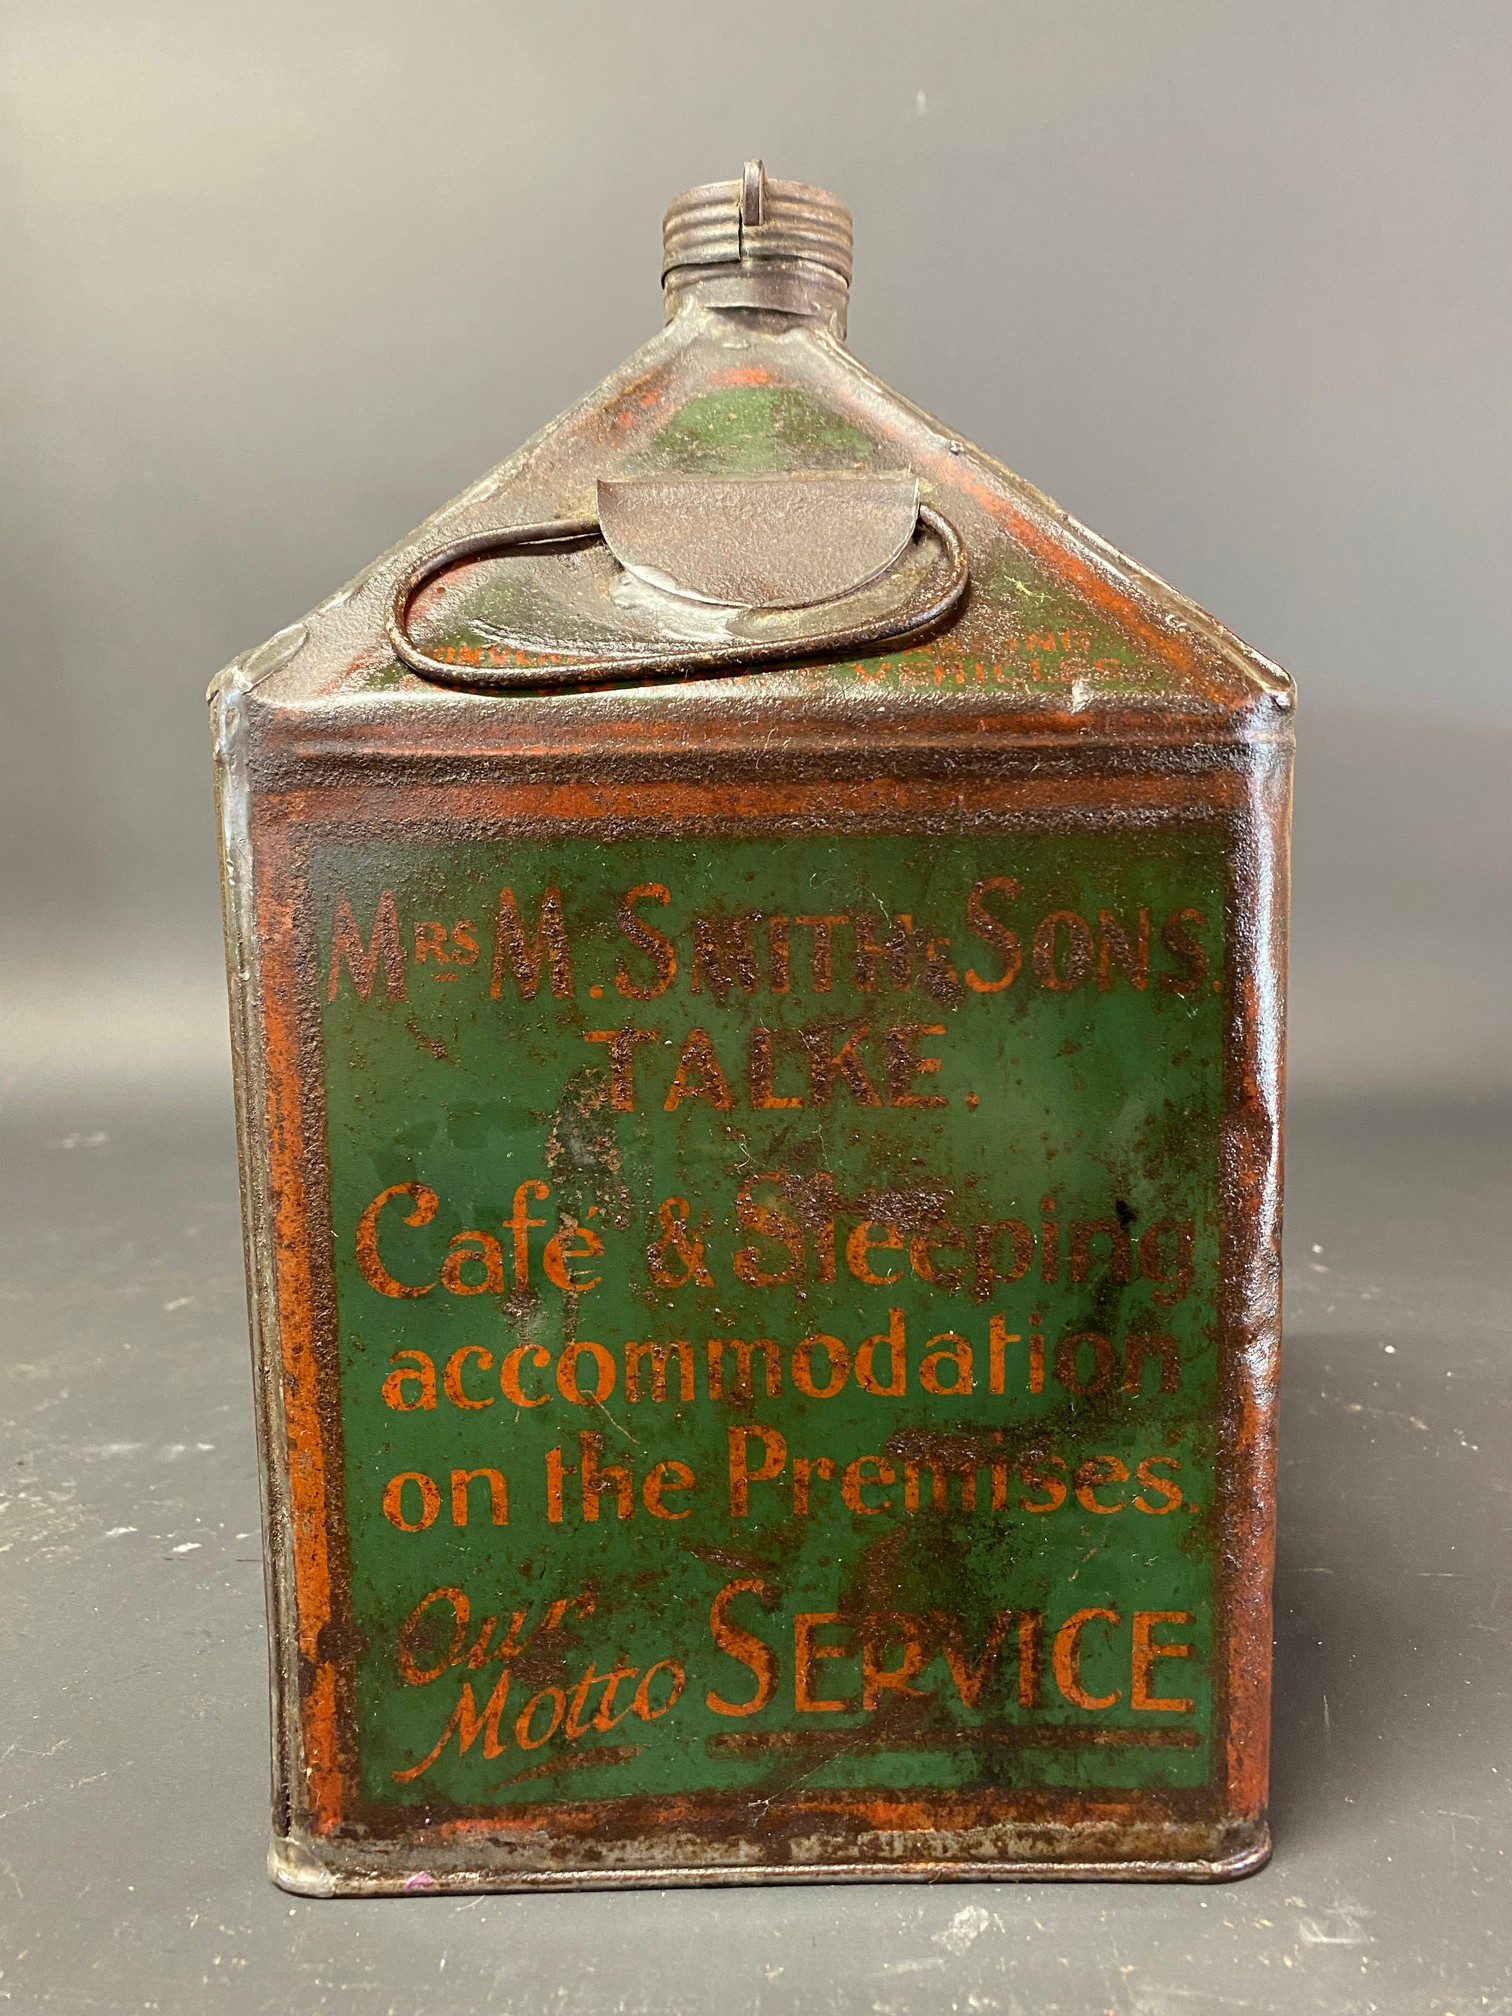 A Mrs M Smith & Sons of Talke Garage, Talke, Stoke on Trent Lubricating Oil gallon pyramid can. - Image 2 of 6